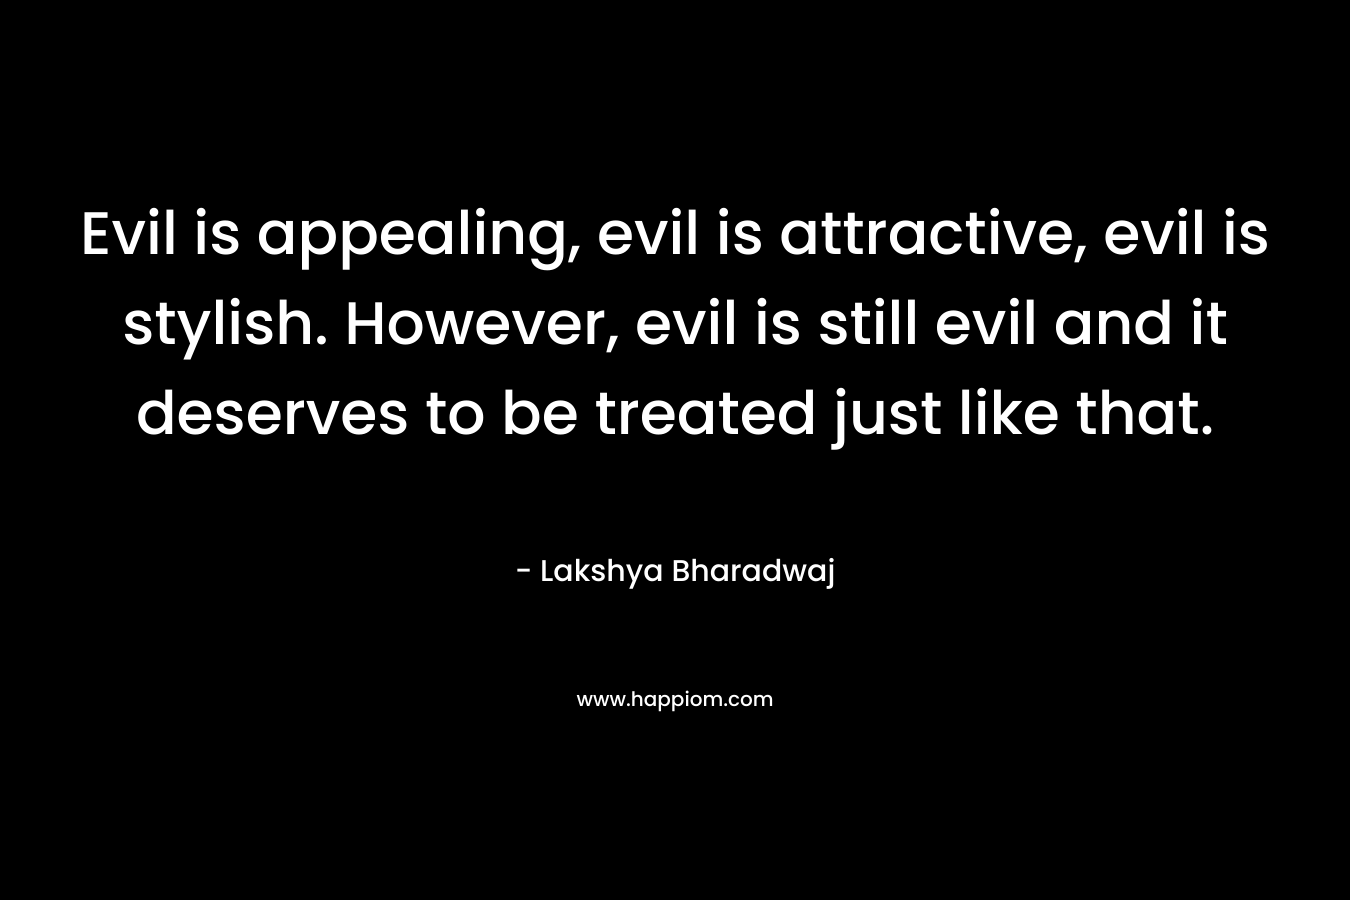 Evil is appealing, evil is attractive, evil is stylish. However, evil is still evil and it deserves to be treated just like that.